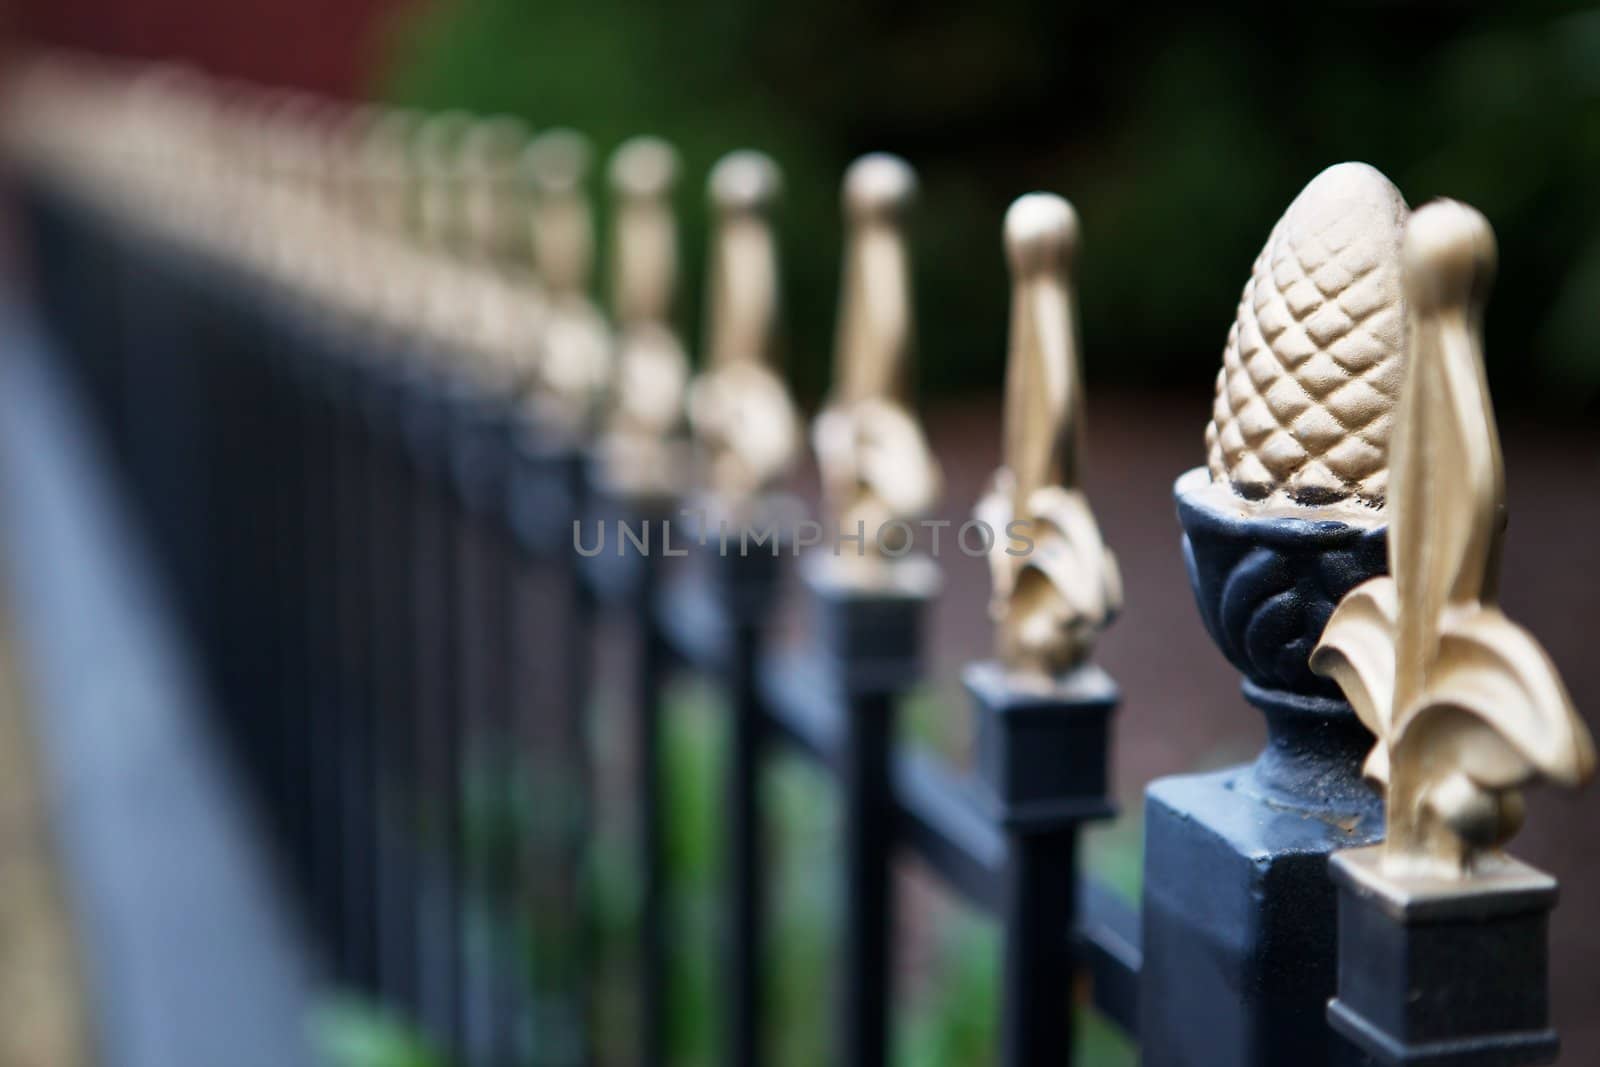 Gold tipped Iron fence narrow DOF by bobkeenan